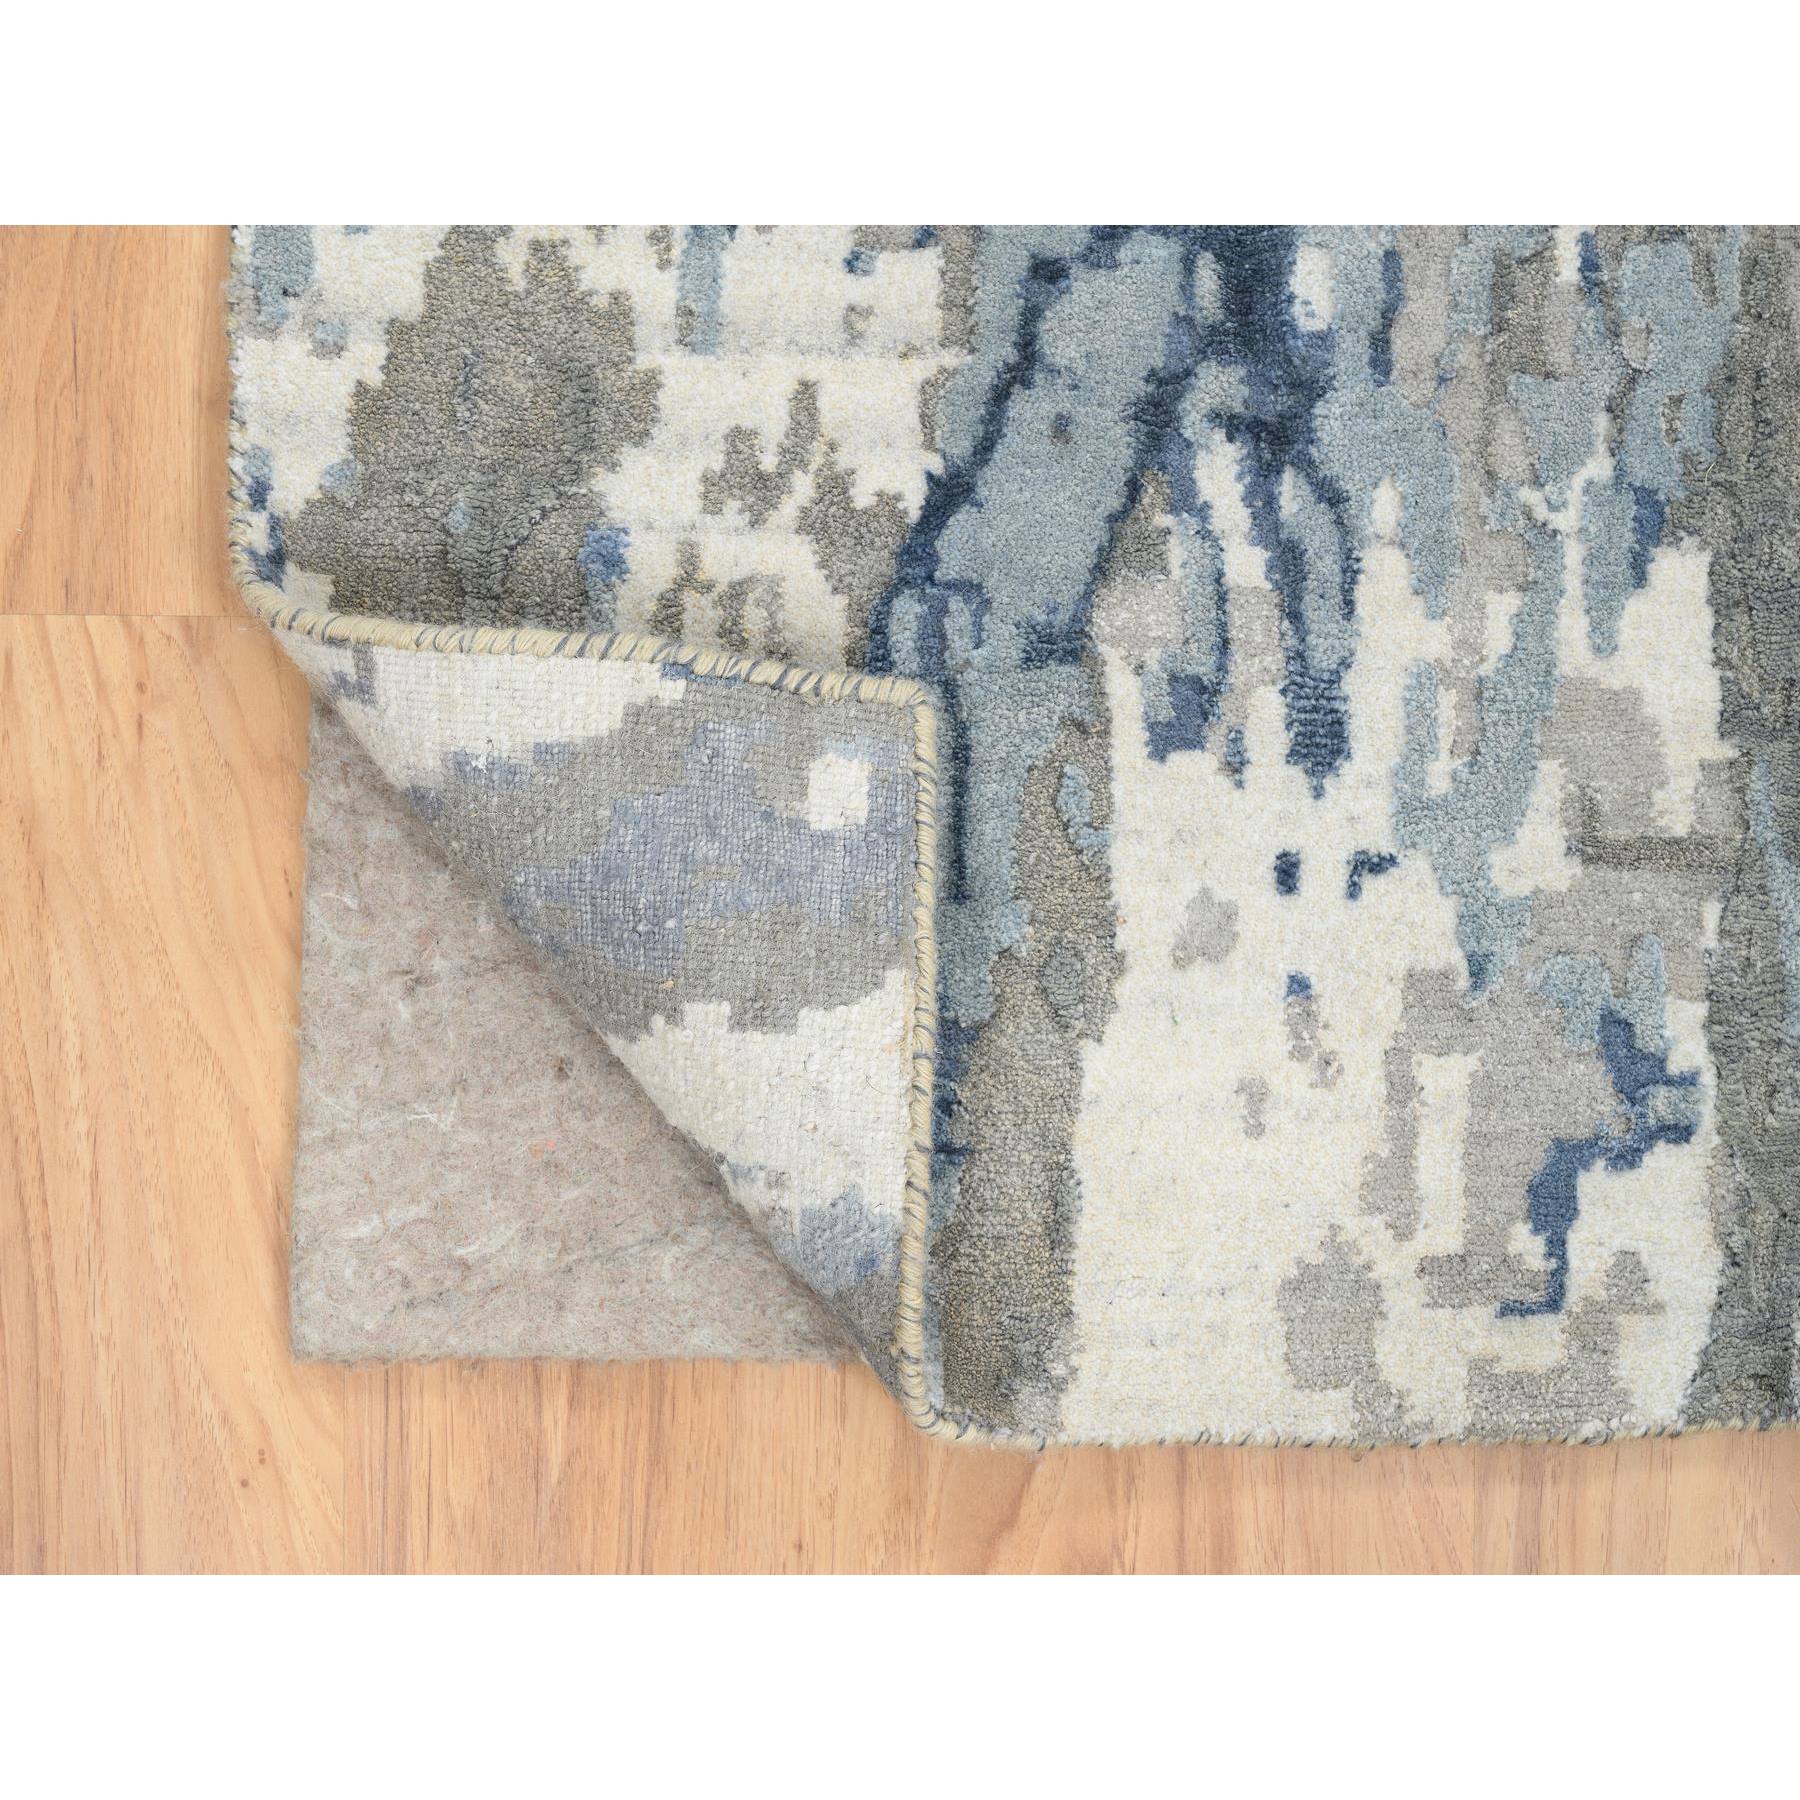 4'2"x11'9" Blue, Modern Abstract Design Hi-low Pile, Wool and Silk Hand Woven, Wide Runner Oriental Rug 